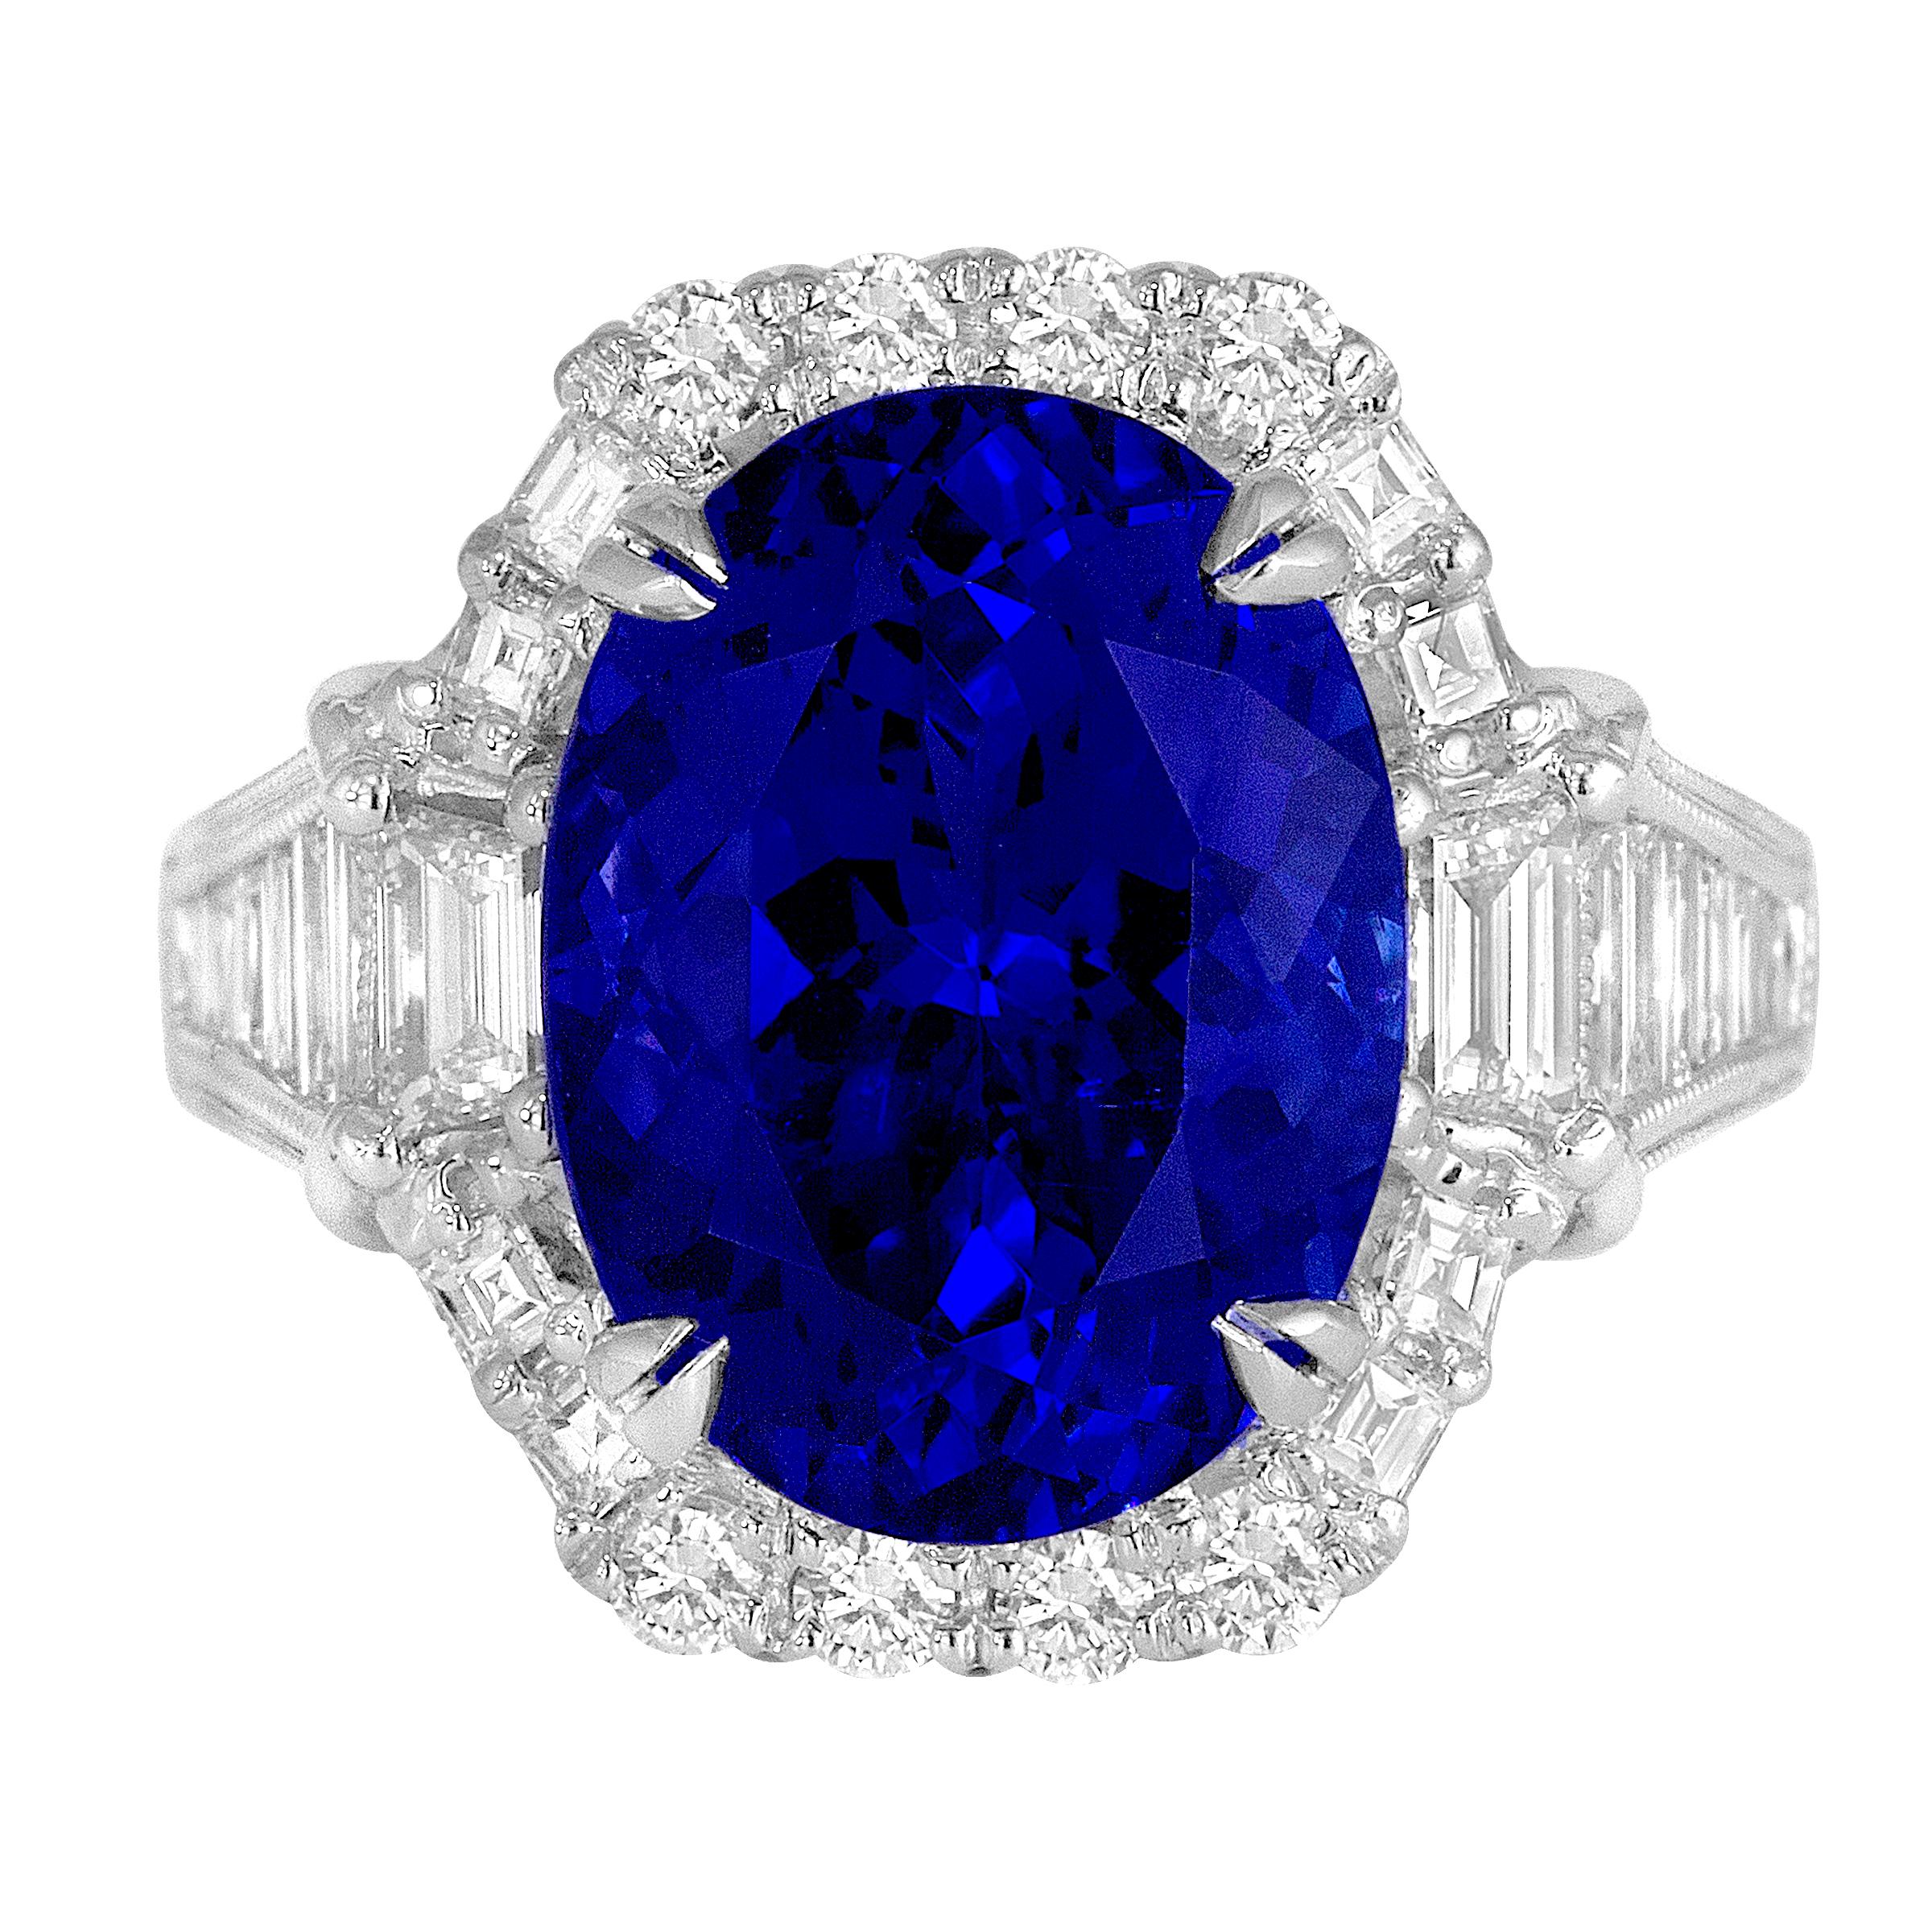 (DiamondTown) This gorgeous ring holds an 8.30 carat oval cut bluish violet Tanzanite center, surrounded by a halo of round and baguette diamonds. Additional baguette diamonds decorate the side shank.

Center: 8.30 Carat oval cut Tanzanite
Total